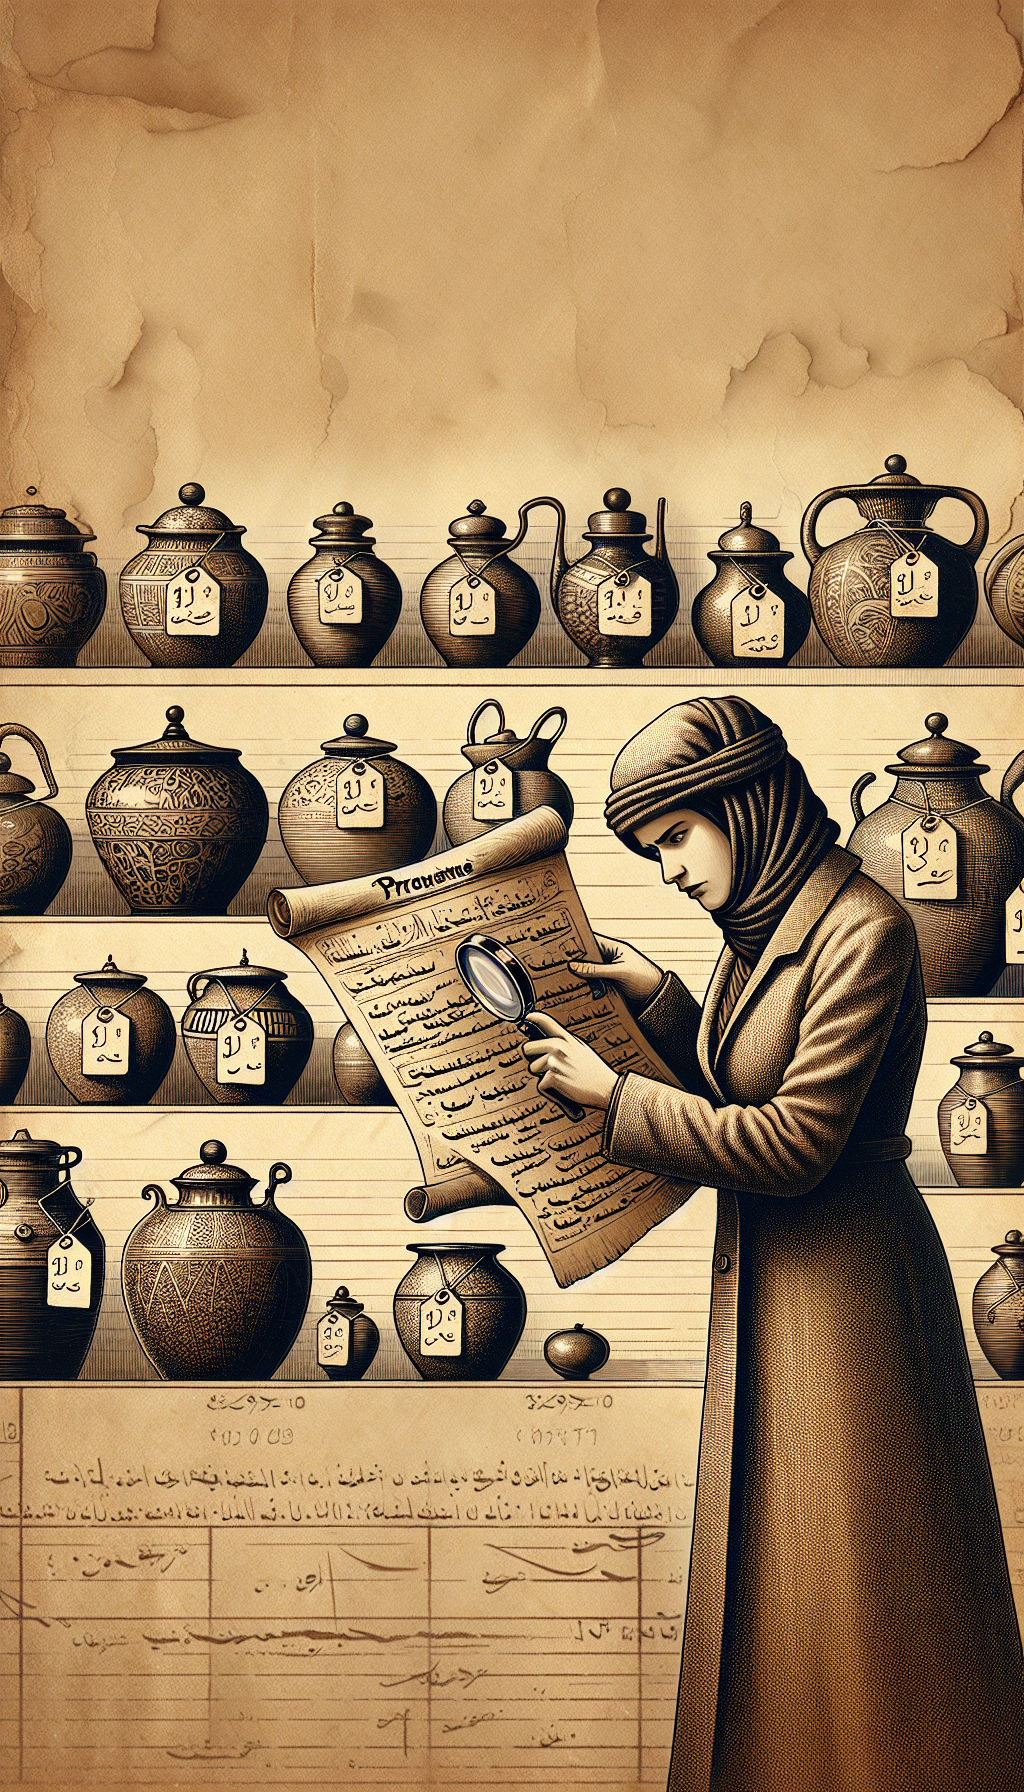 A sepia-toned illustration depicts a detective-themed antiquarian unearthing a trove of vintage crocks, magnifying glass in hand, scrutinizing a faded parchment scroll labeled 'Provenance'. Each crock bears a price tag with symbols of currency, age, and origin. The backdrop is a mosaic of historical timelines, subtly indicating the evolution of crock values.